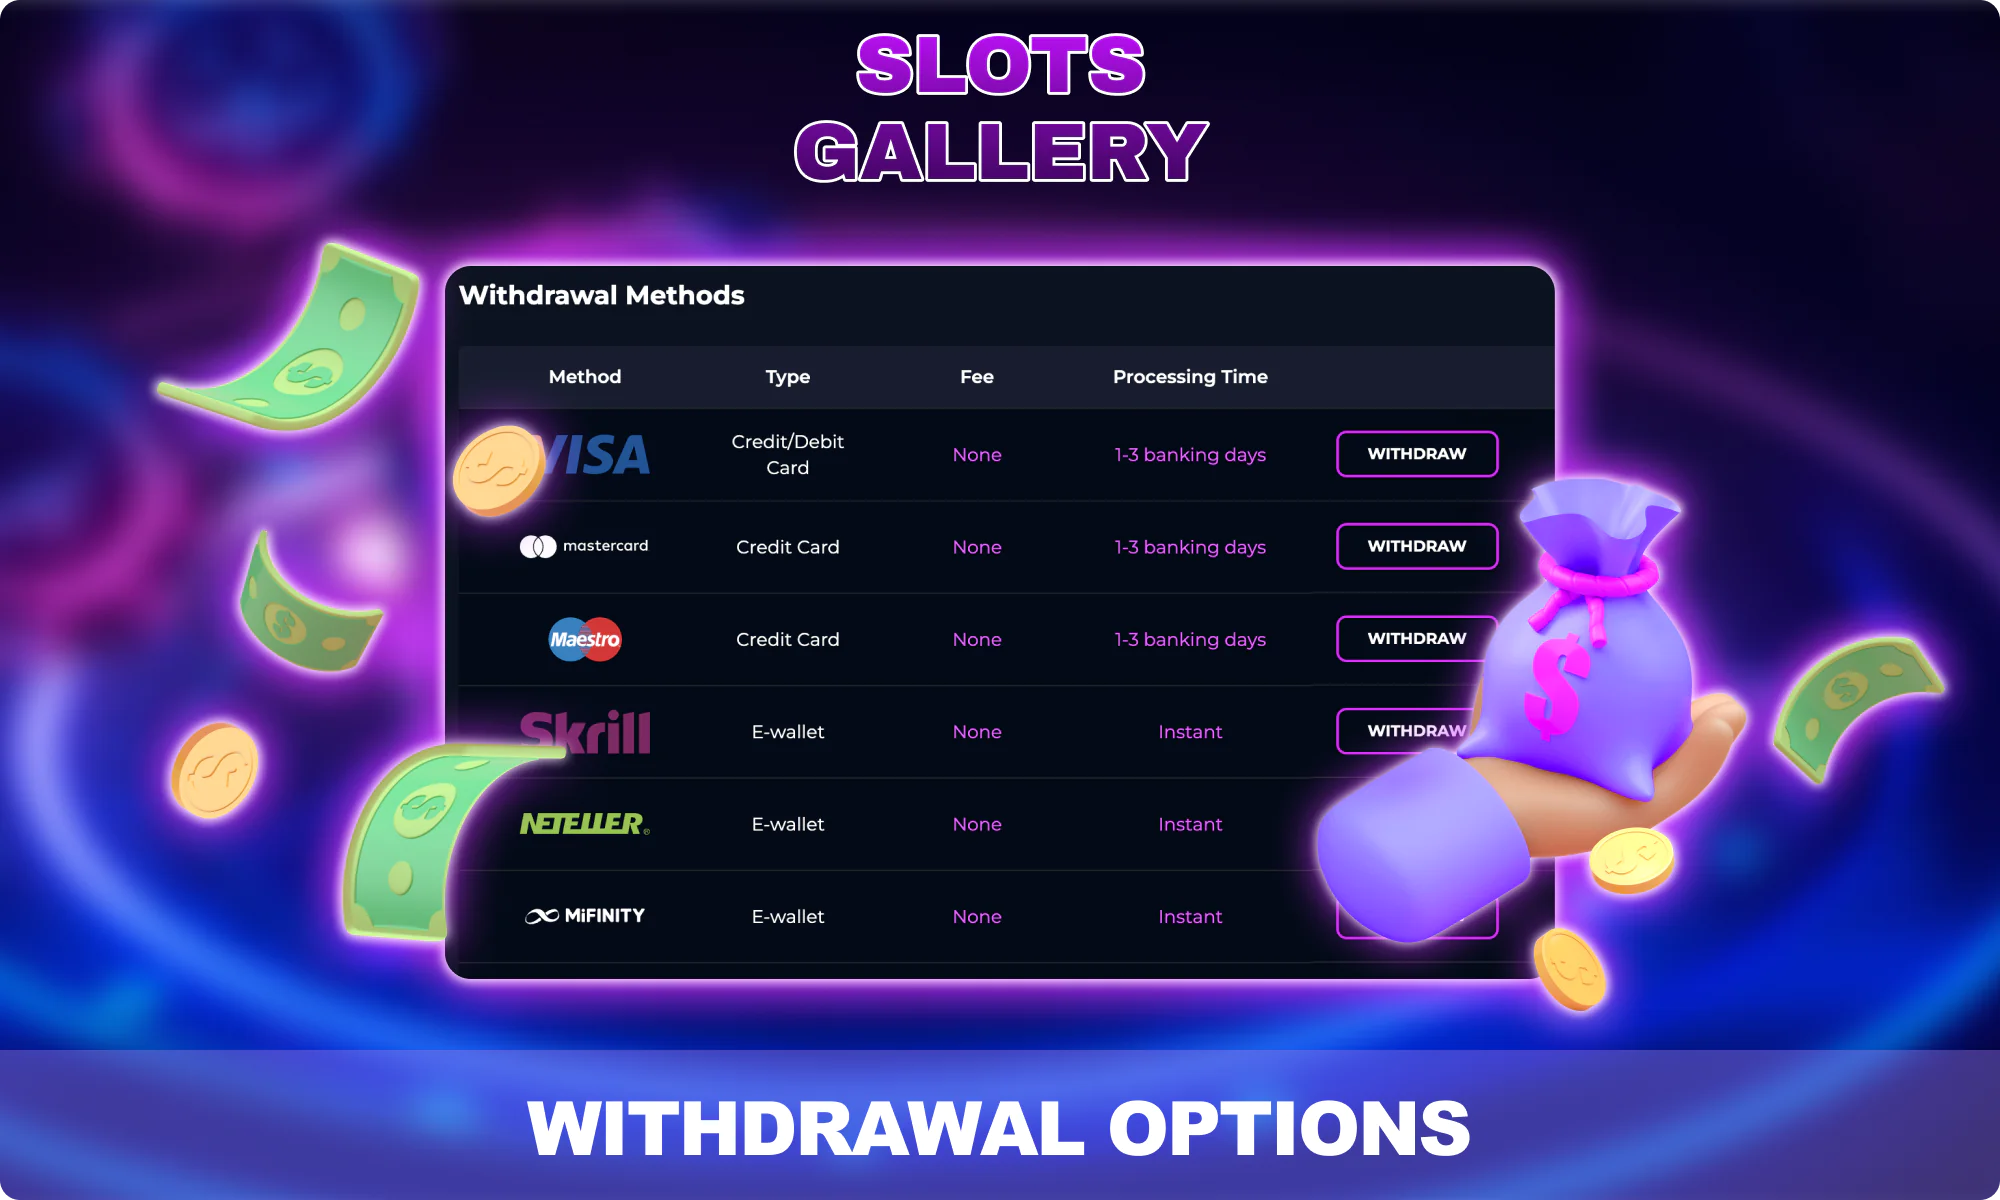 What withdrawal options are available on the Slots Gallery website